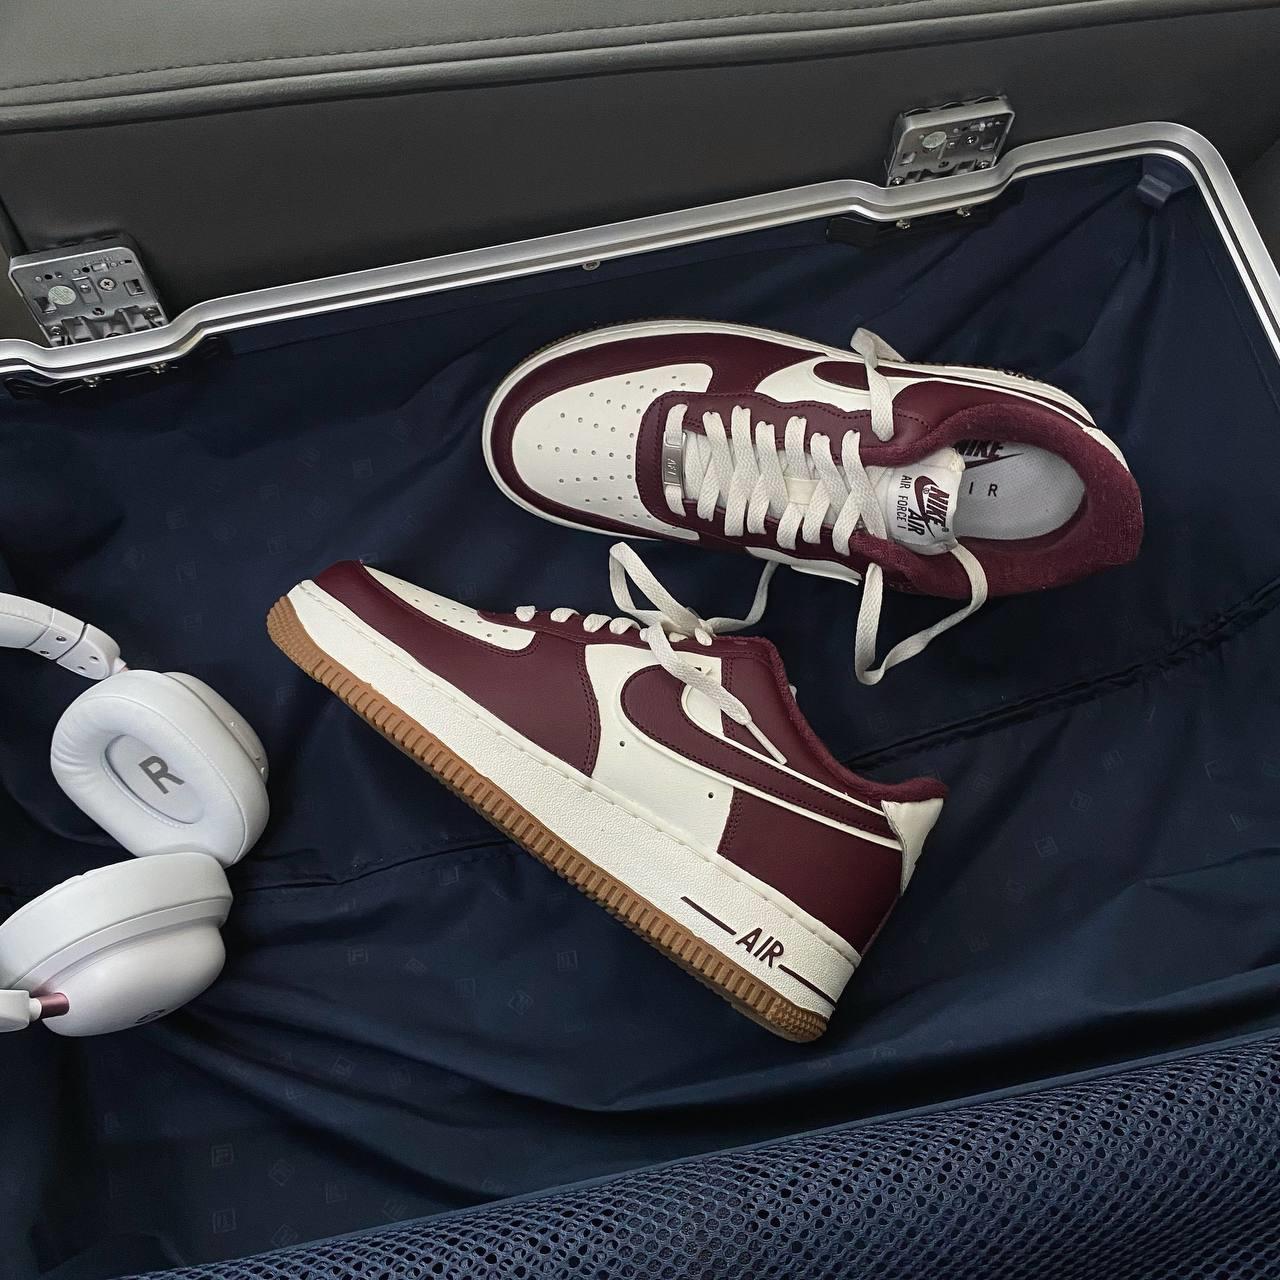 Nike Air Force 1 07 LV8 'College Pack - Night Maroon' Sail DQ7659-102 Men's  9.5